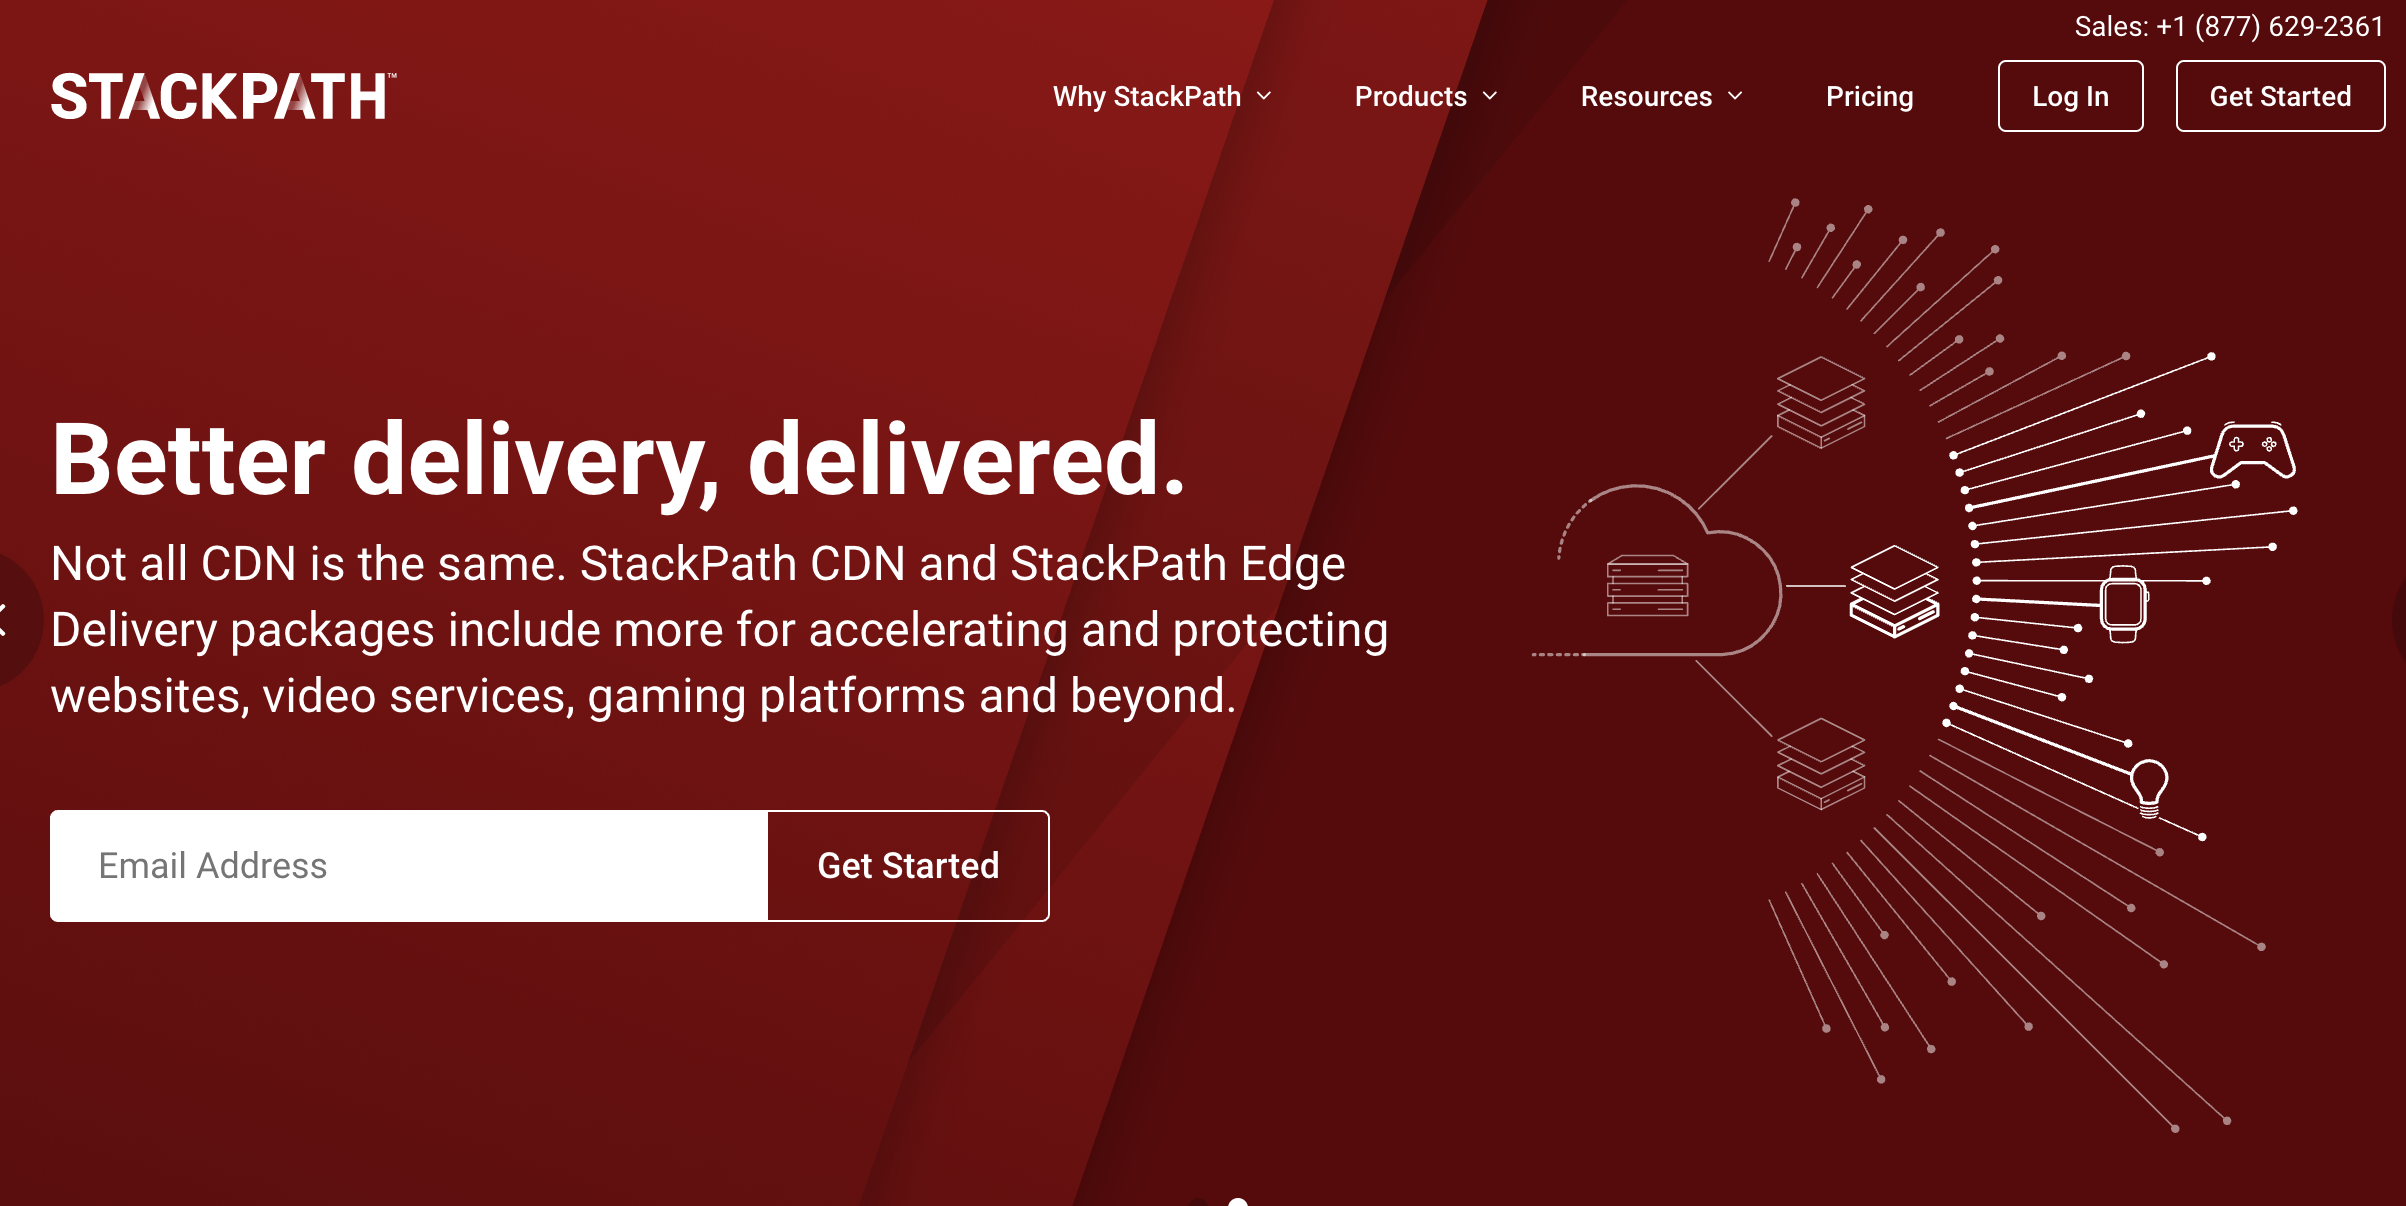 This Is Why StackPath Is So Famous!